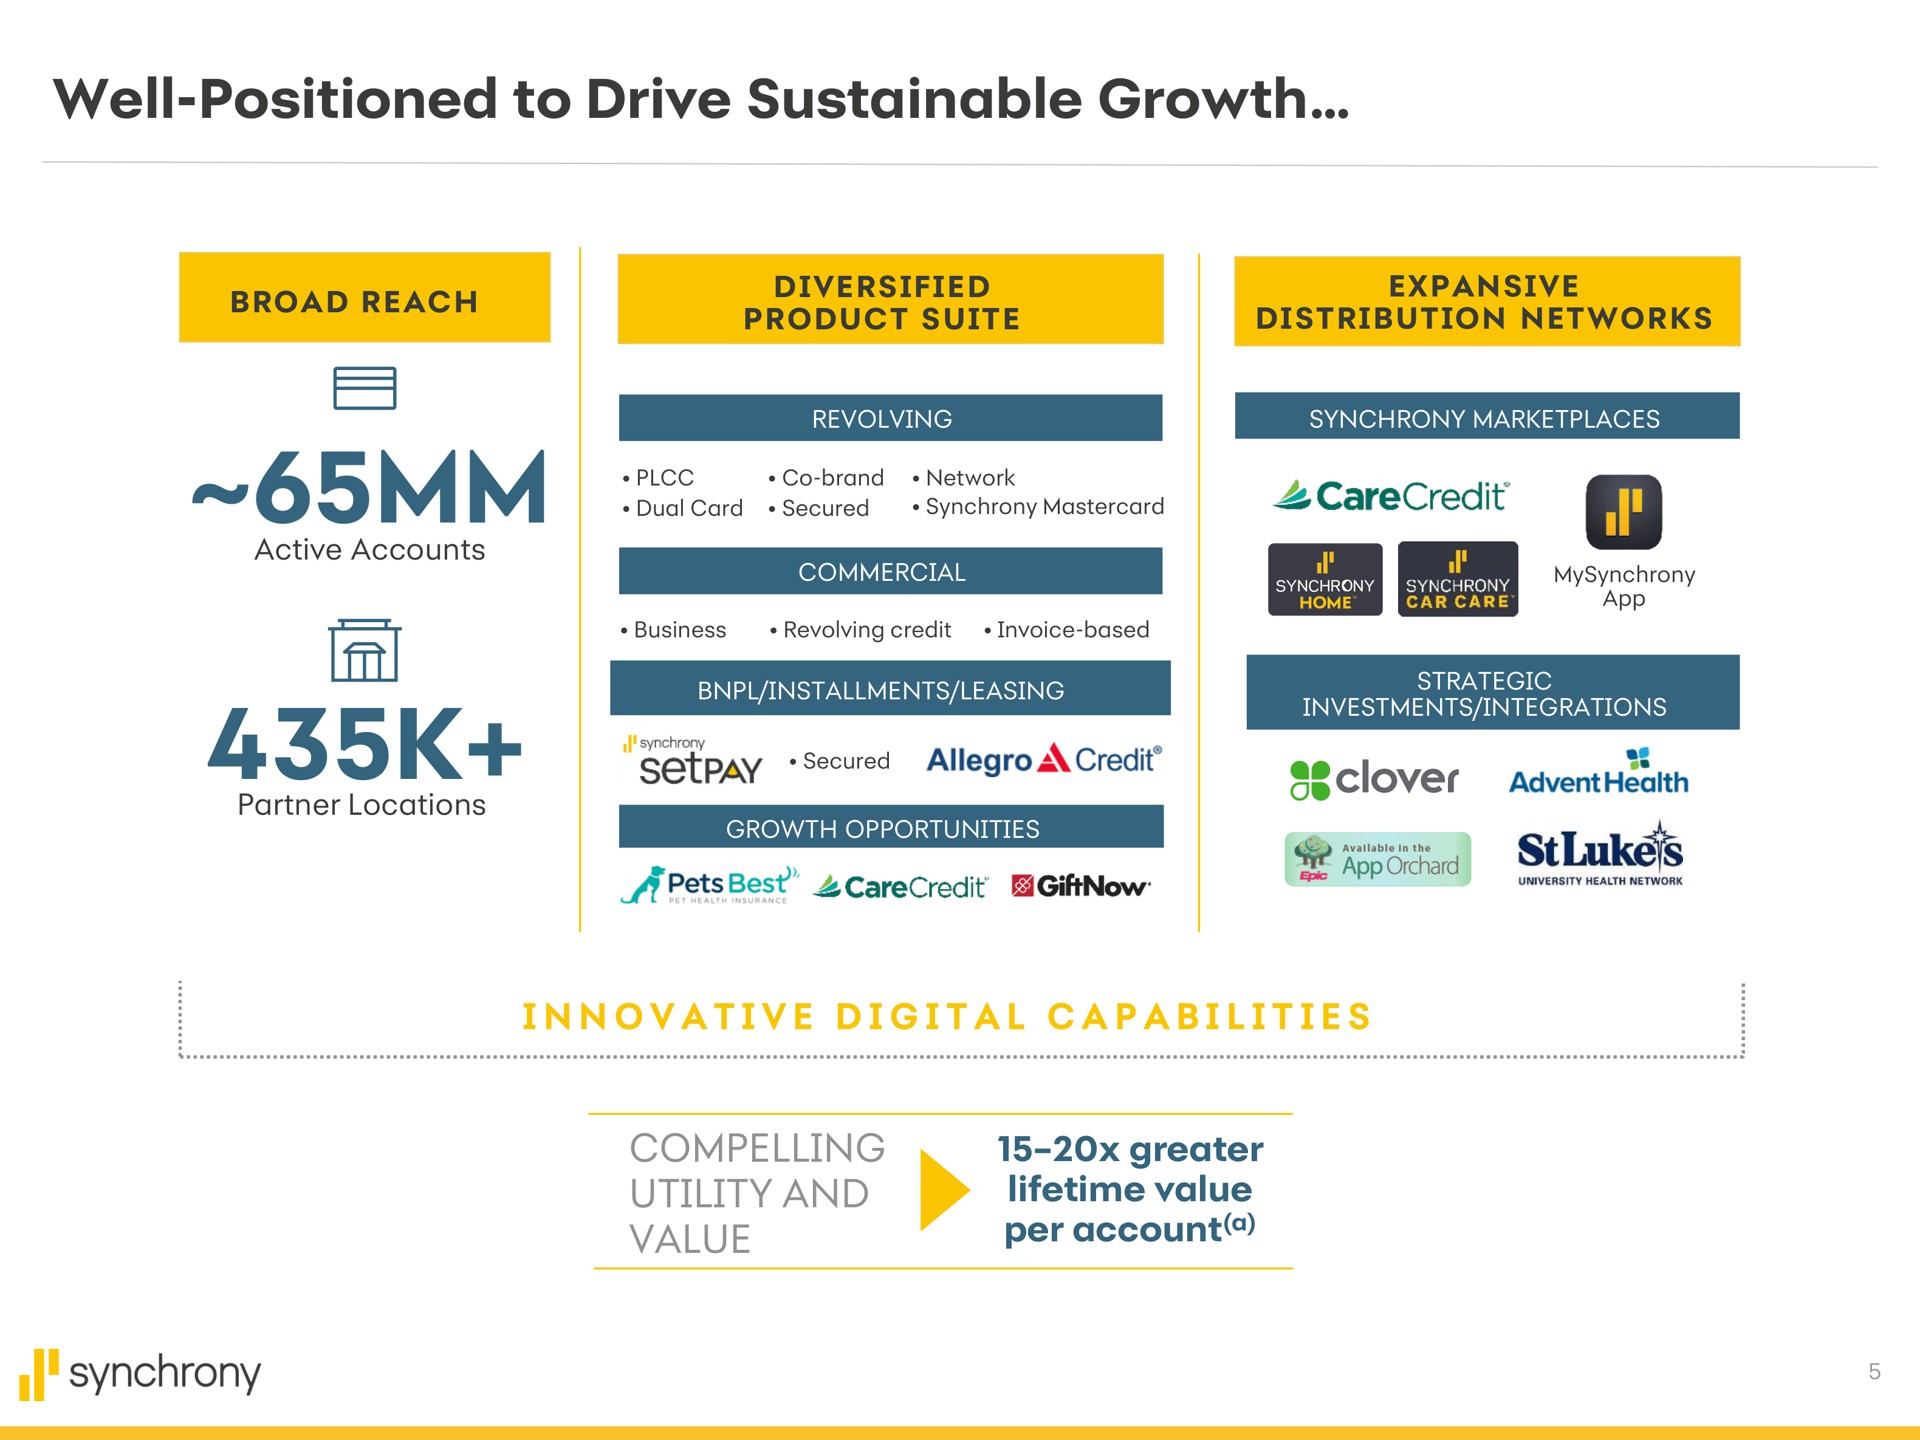 well positioned to drive sustainable growth i a i i i a a a i i i compelling utility and value greater lifetime value per account a broad reach diversified product suite expansive distribution networks clover synchrony | Synchrony Financial